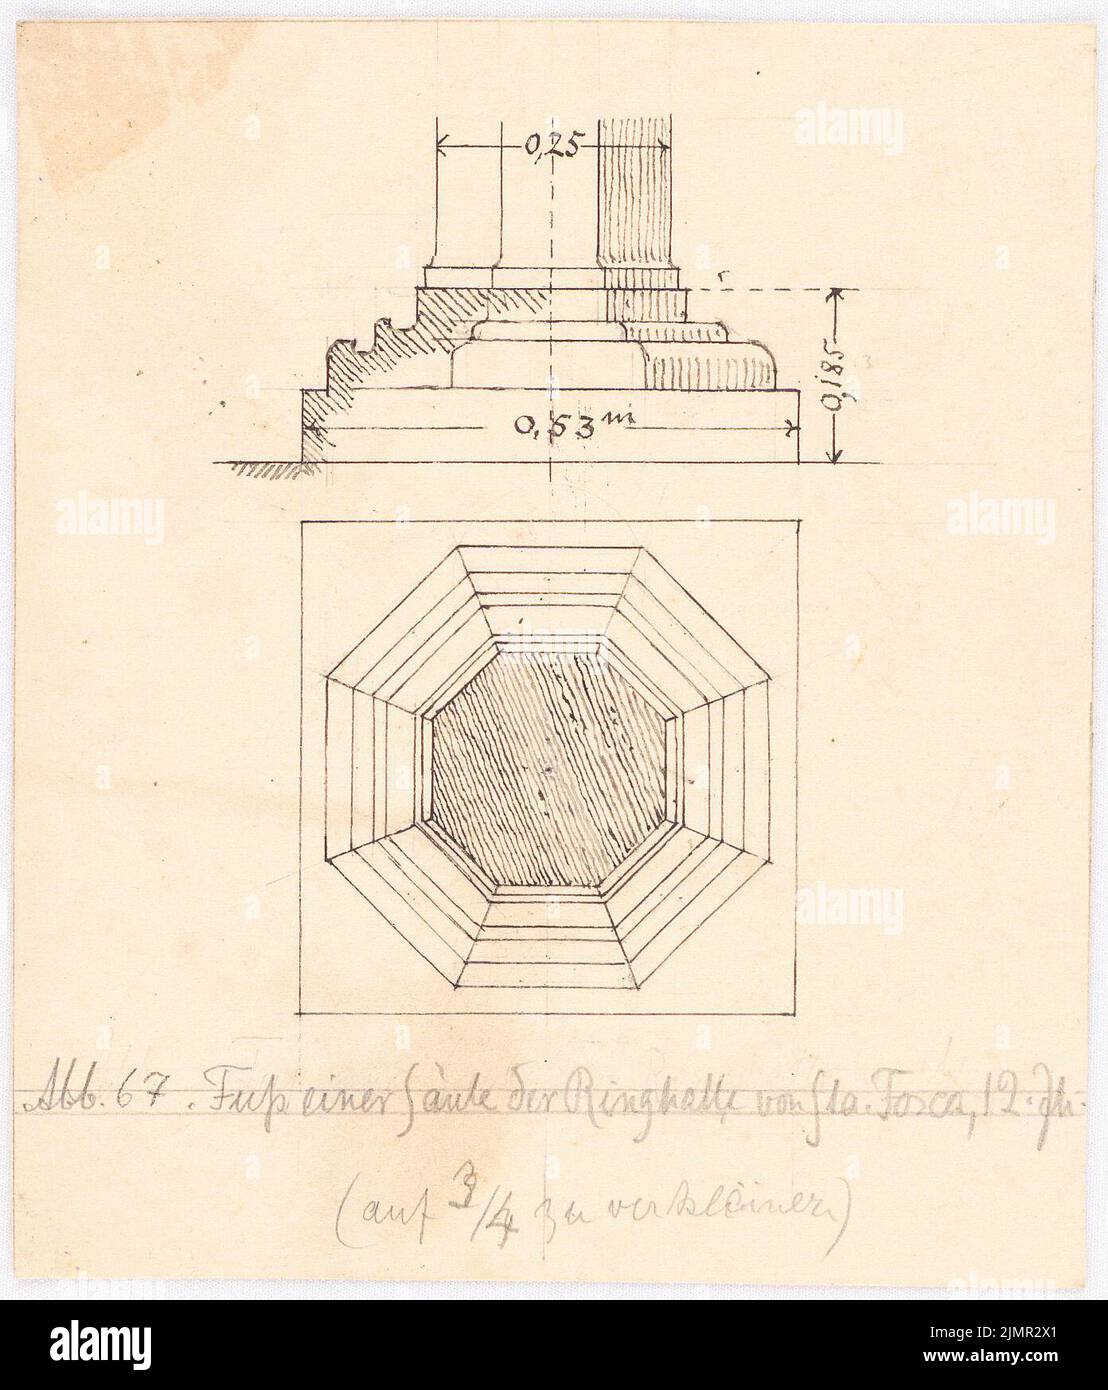 Schulz Bruno (1865-1932), Dom and S. Maria Fosca in Torcello (1899-1899): floor plan and view of the foot of a pillar of the ring hall S.Fosca, 12th century .. Tusche on paper, 13.8 x 11, 8 cm (including scan edges) Schulz Bruno  (1865-1932): Dom S. Maria Assunta und S. Fosca, Torcello Stock Photo